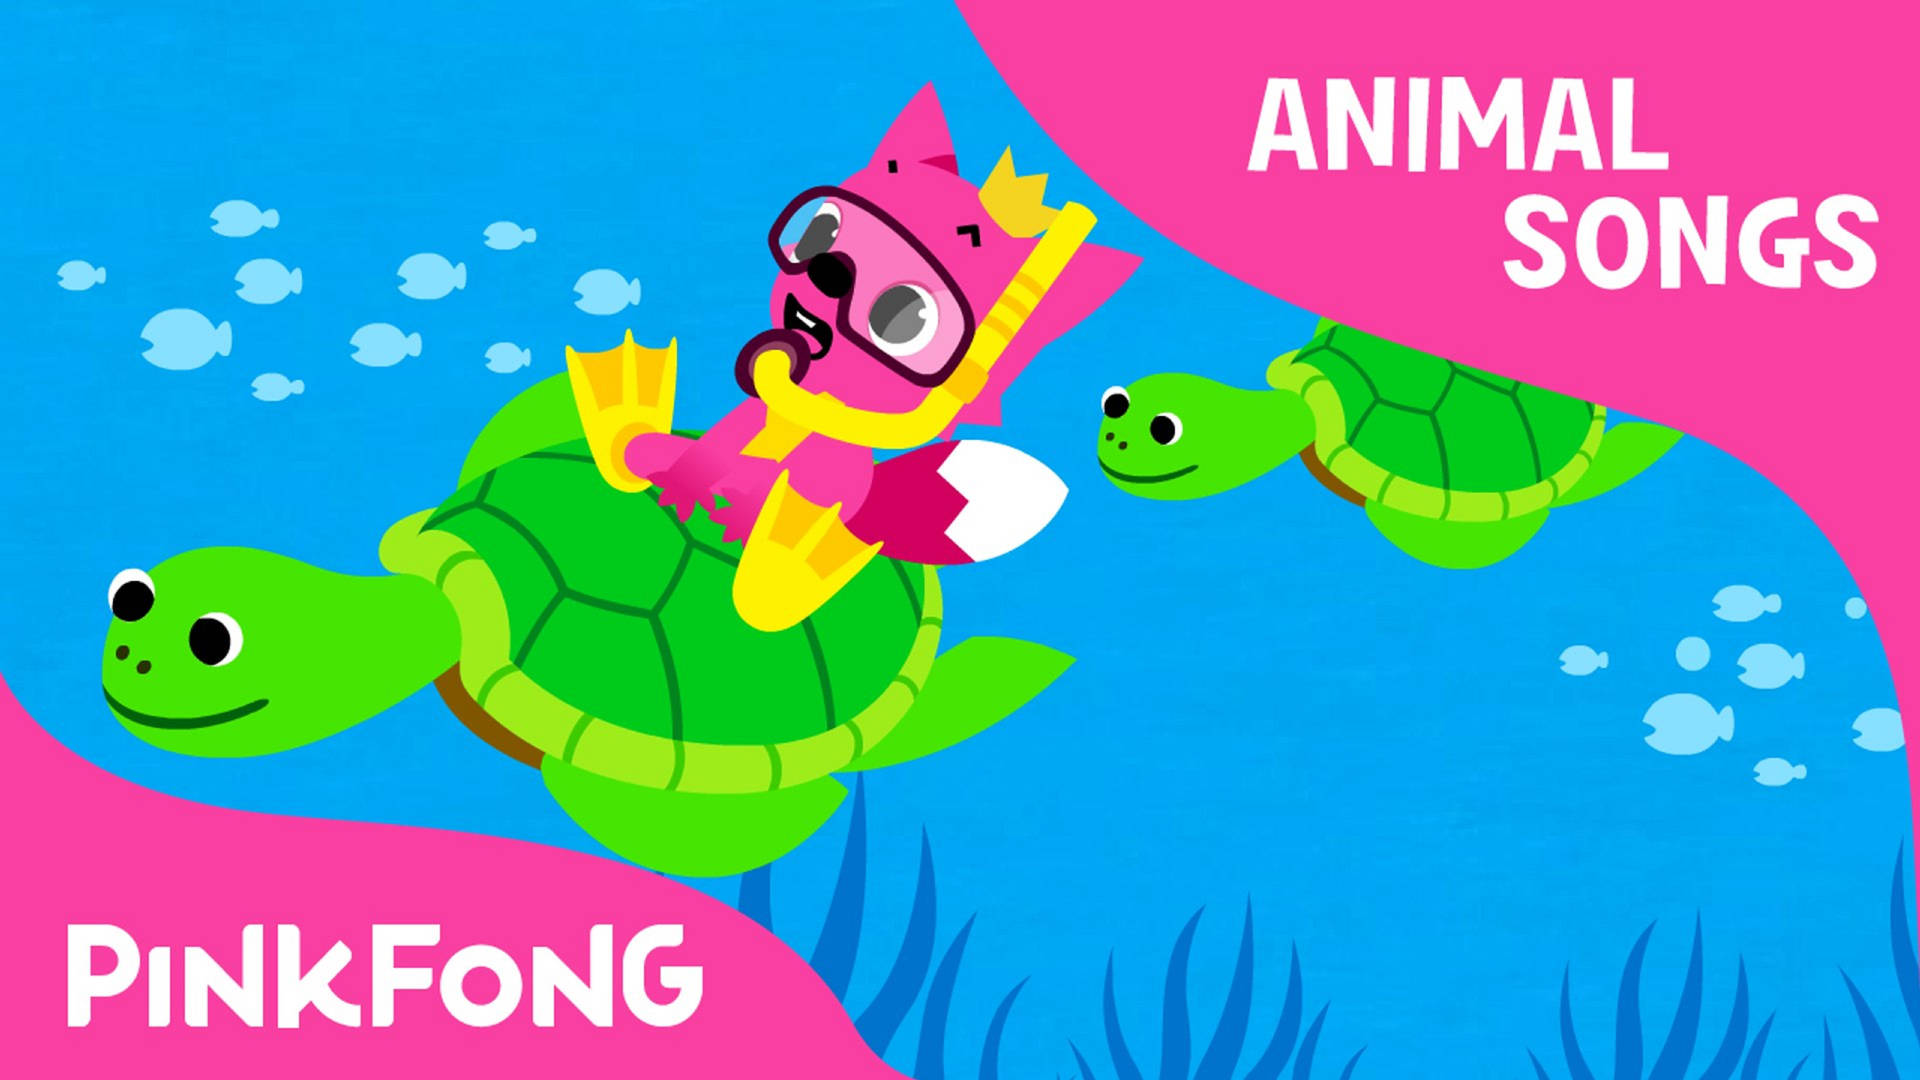 Pinkfong Songs Under The Sea Wallpaper